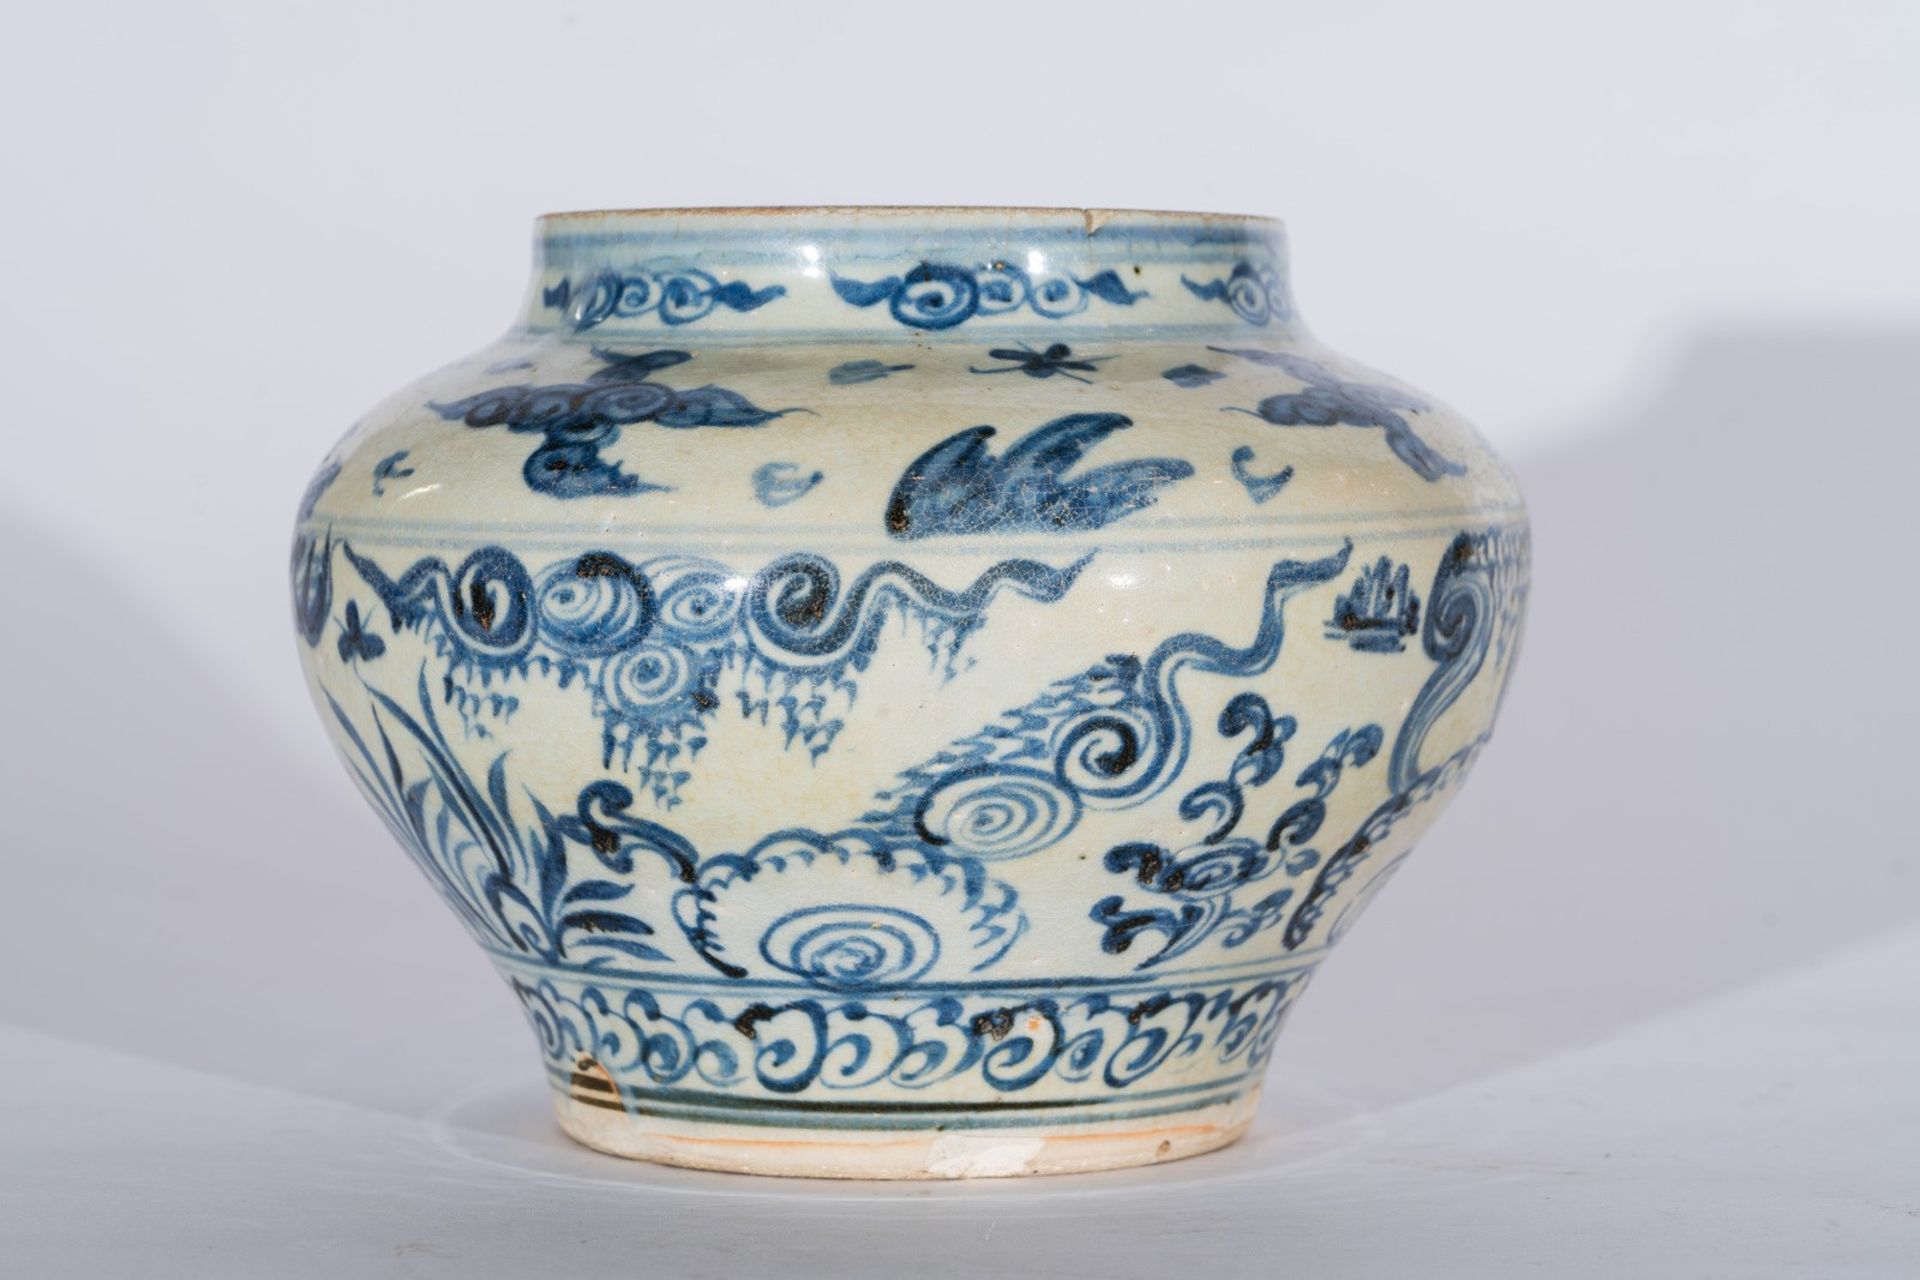 Arte Sud-Est Asiatico A blue and white pottery vase painted with vegetal motifs and clouds Vietnam, - Image 2 of 4